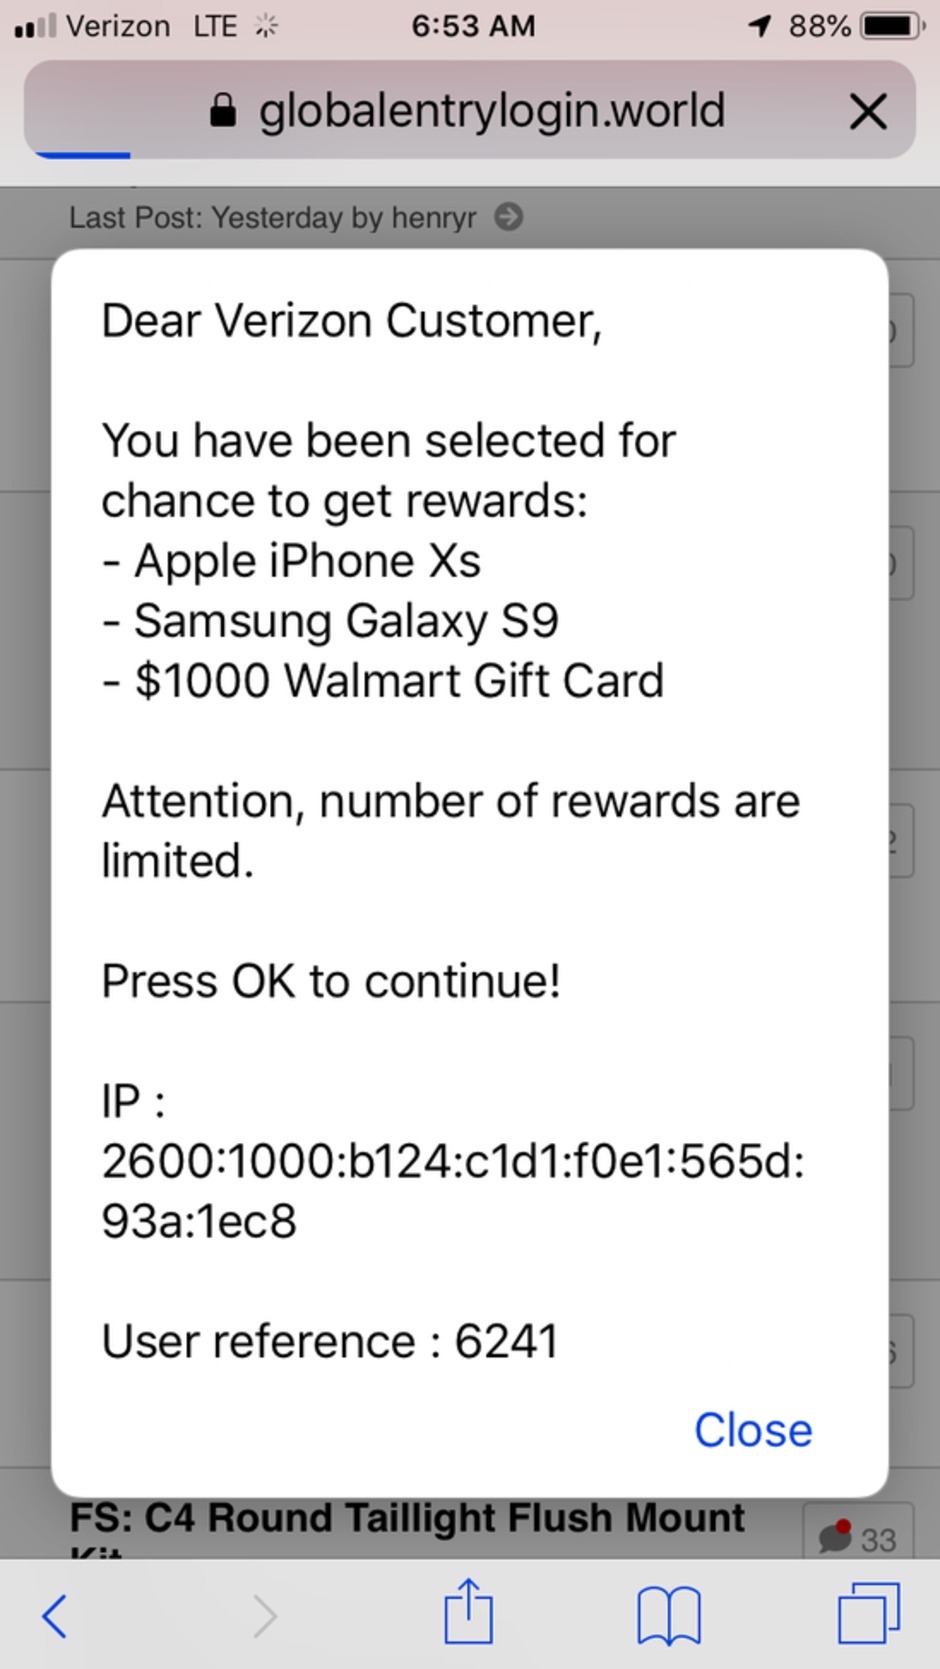 Example of an eGobbler landing page - U.S. iOS users need to uninstall the Chrome browser app now